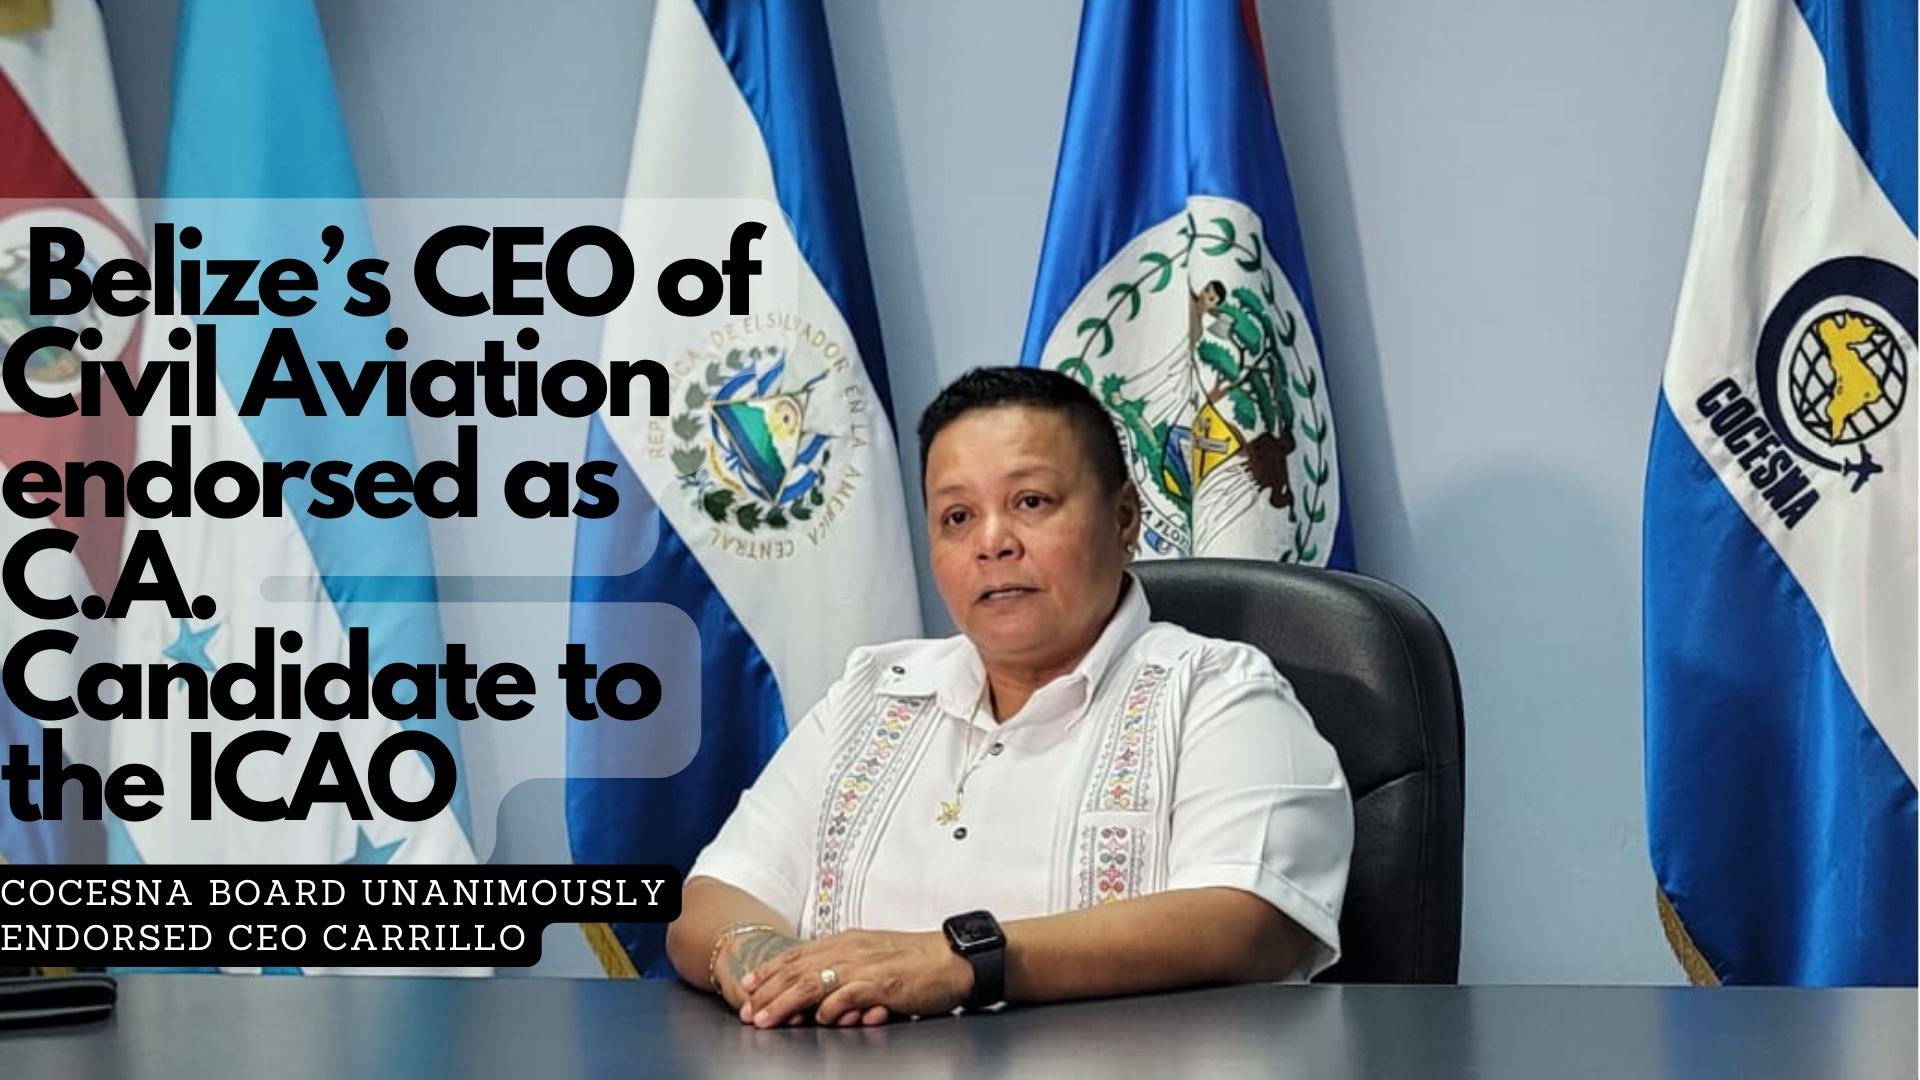 COCESNA endorses Belize’s CEO of Civil Aviation as Central American Candidate to the ICAO